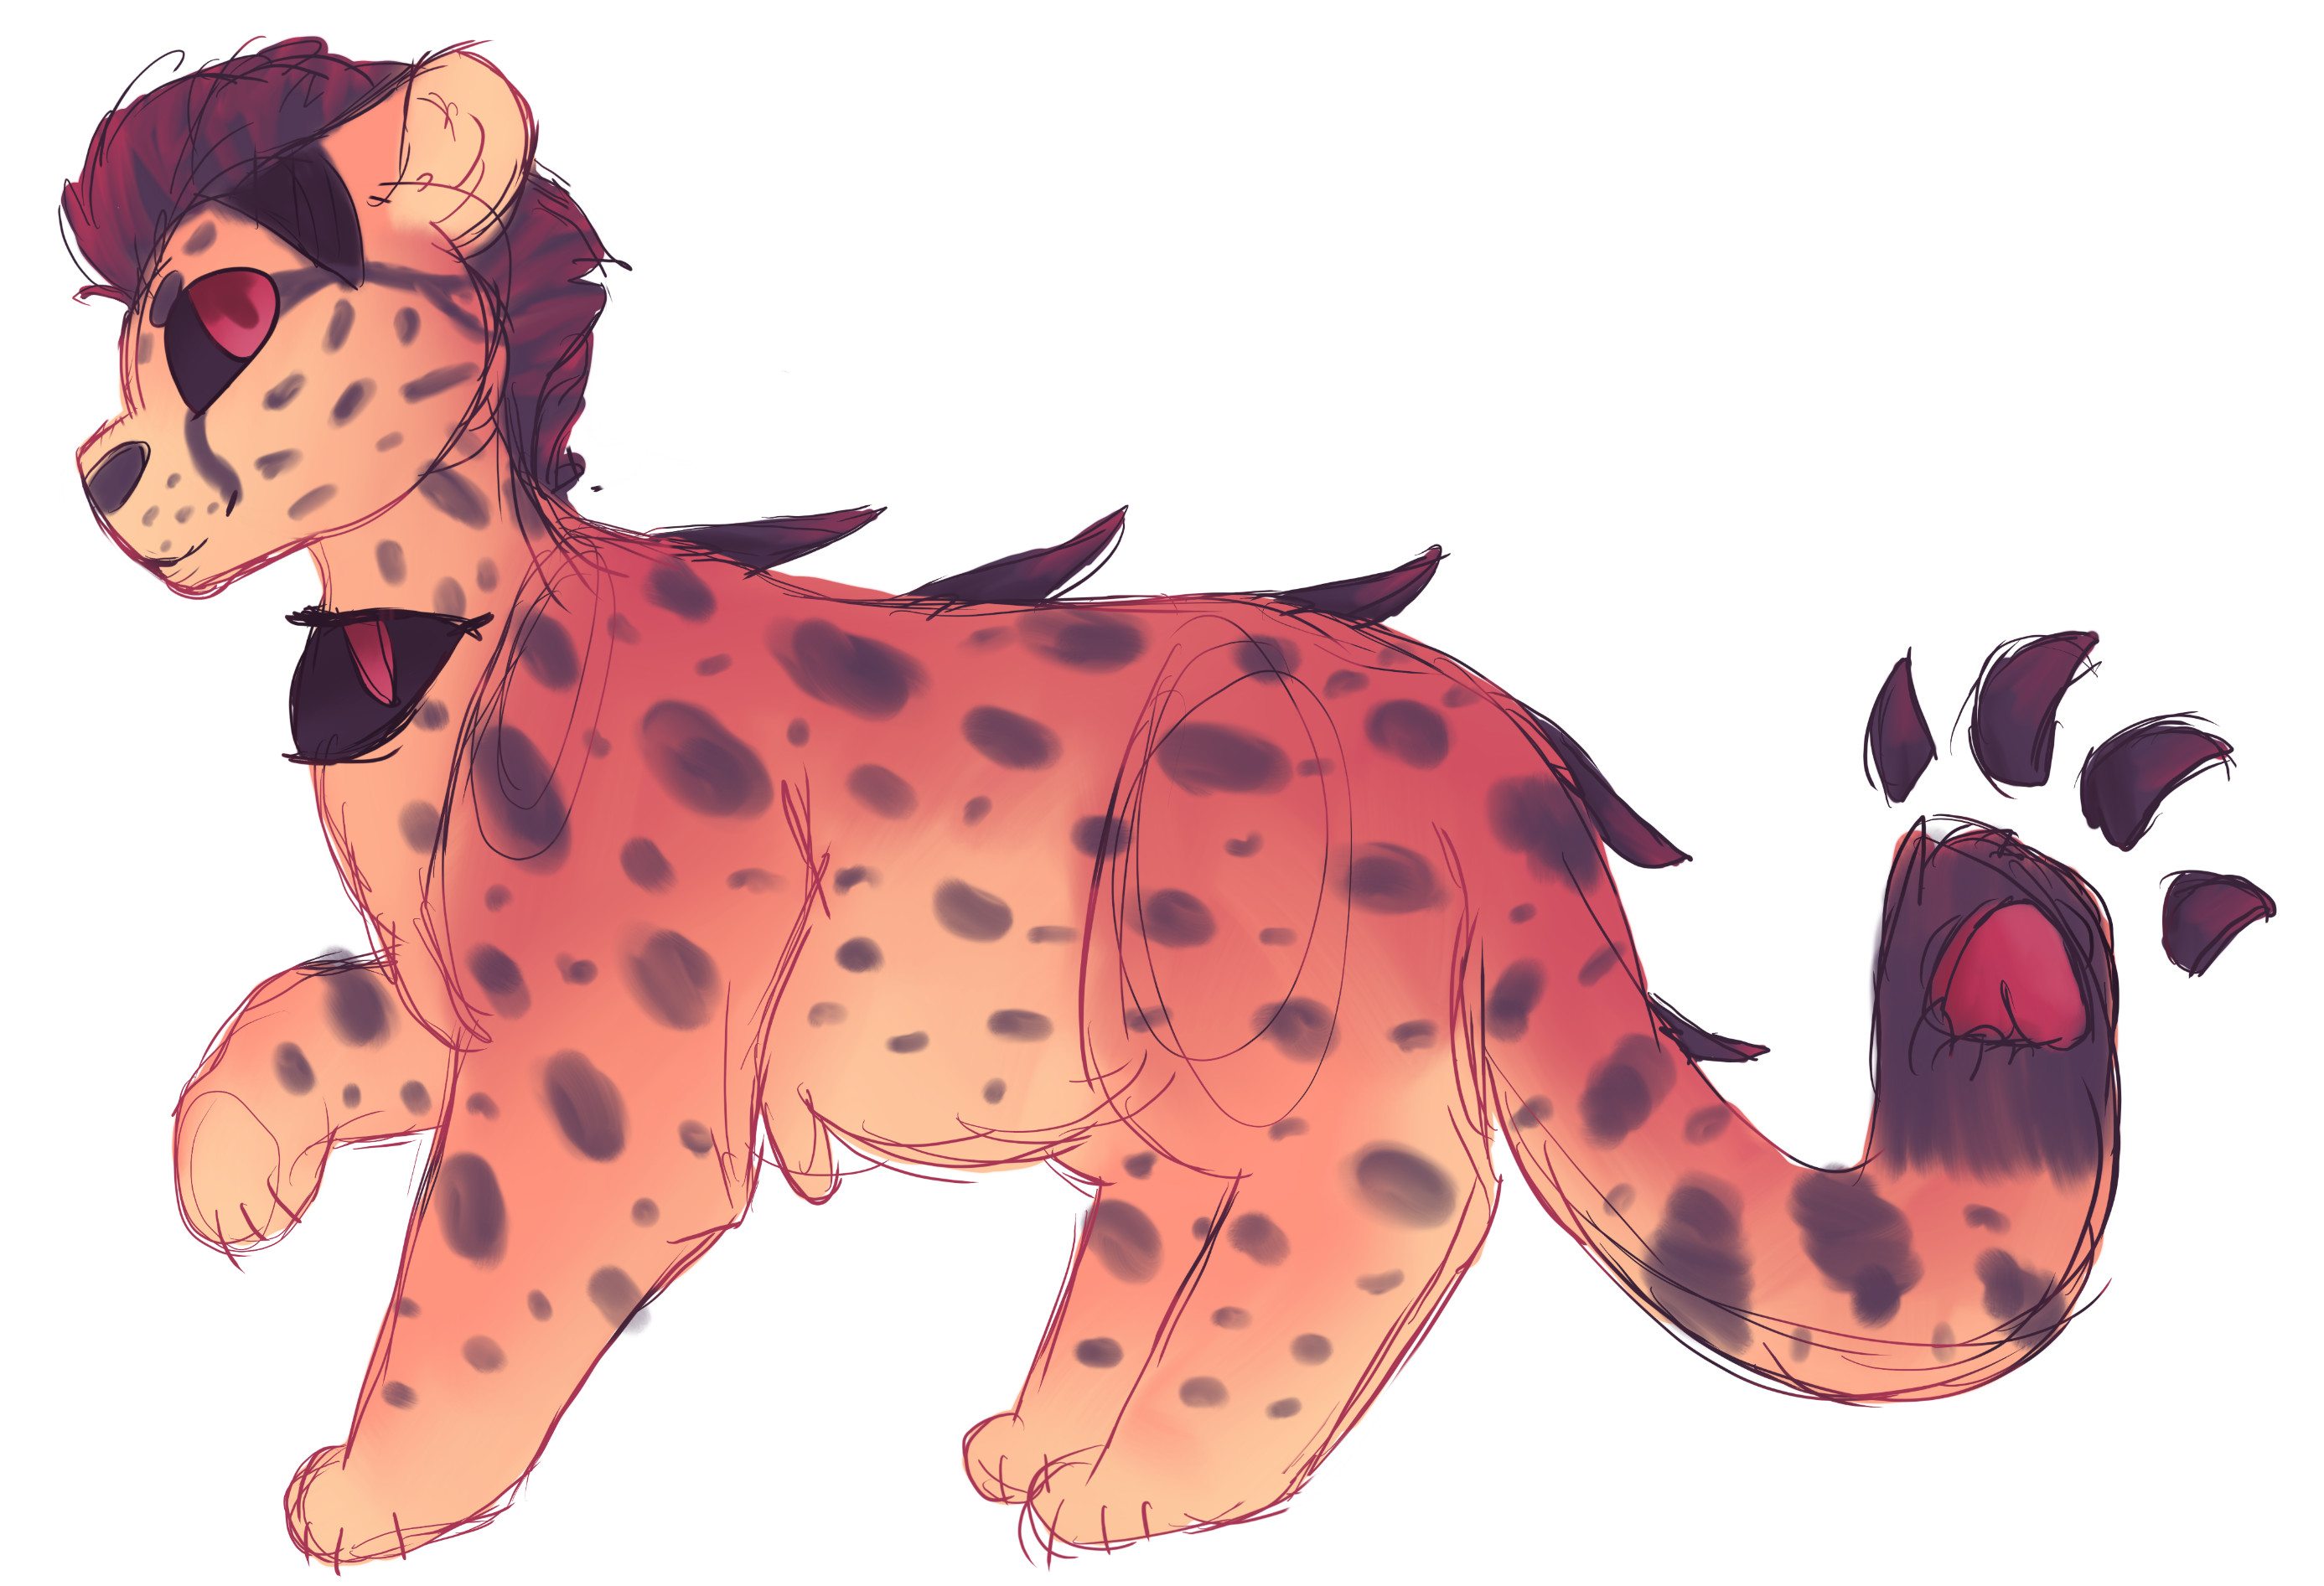 cheetah_babe_by_cupofchamomile-dcb1gfg.png